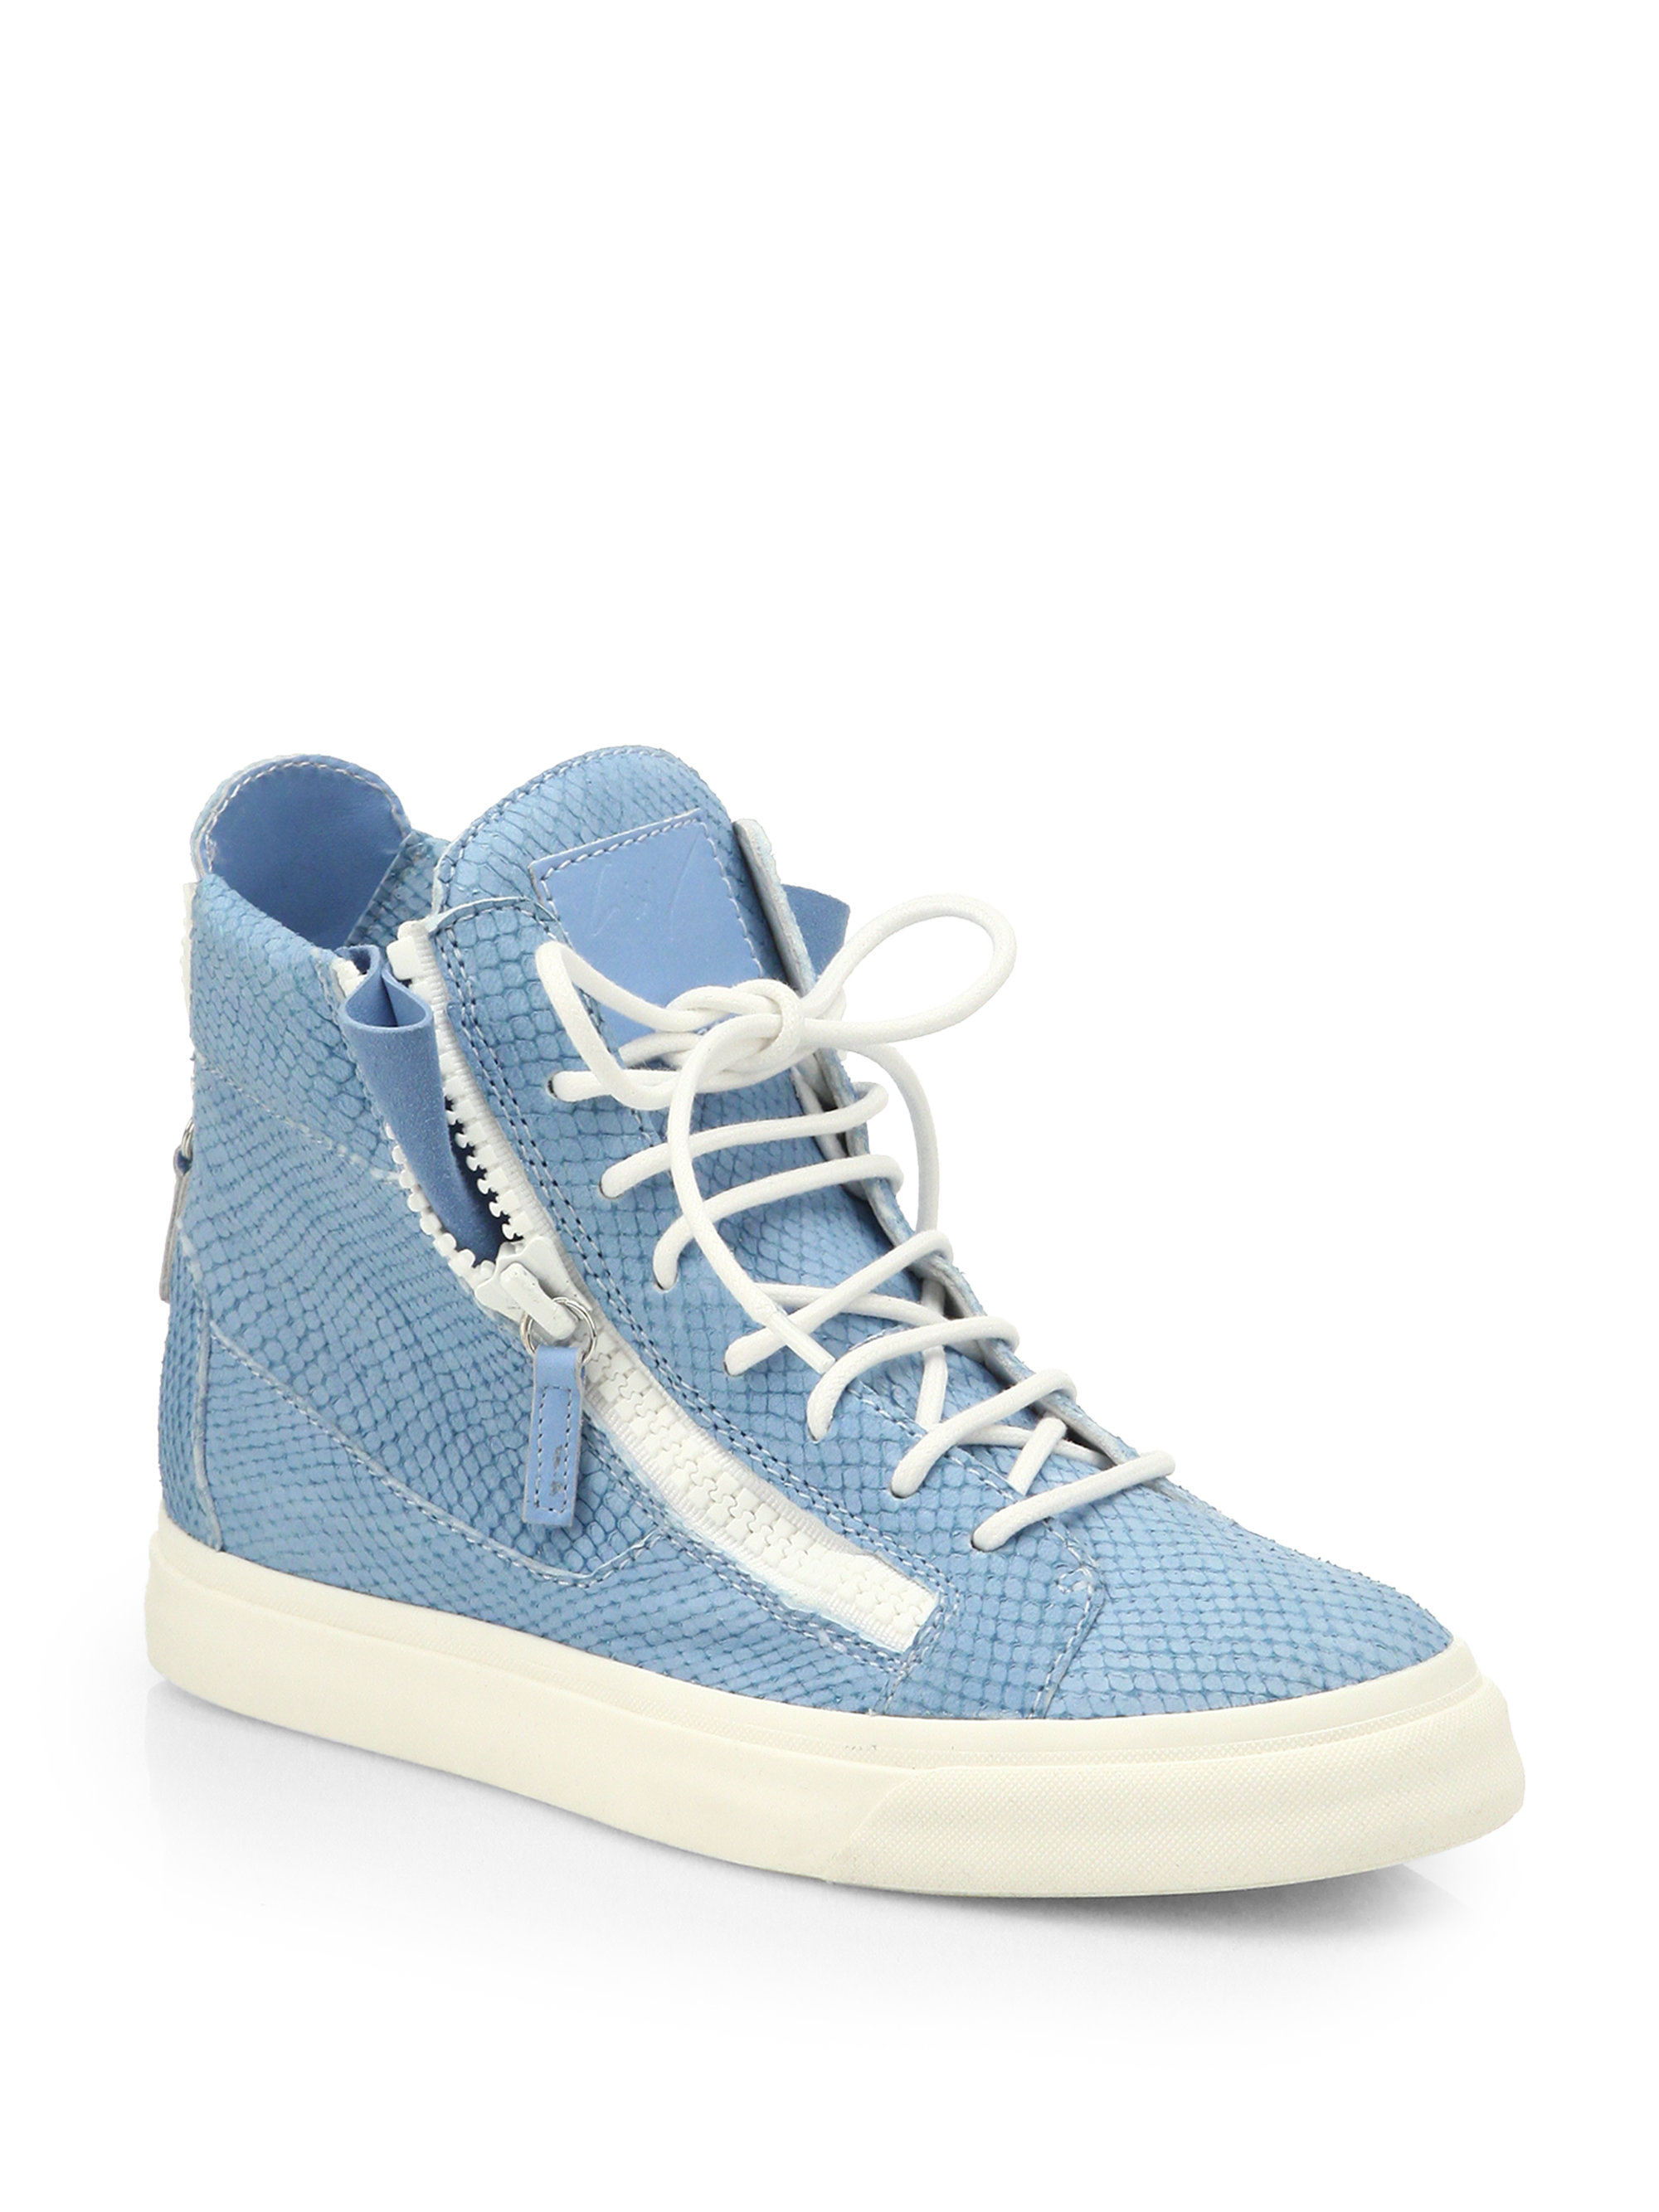 Giuseppe zanotti Snake-Embossed Leather High-Top Sneakers in Blue | Lyst